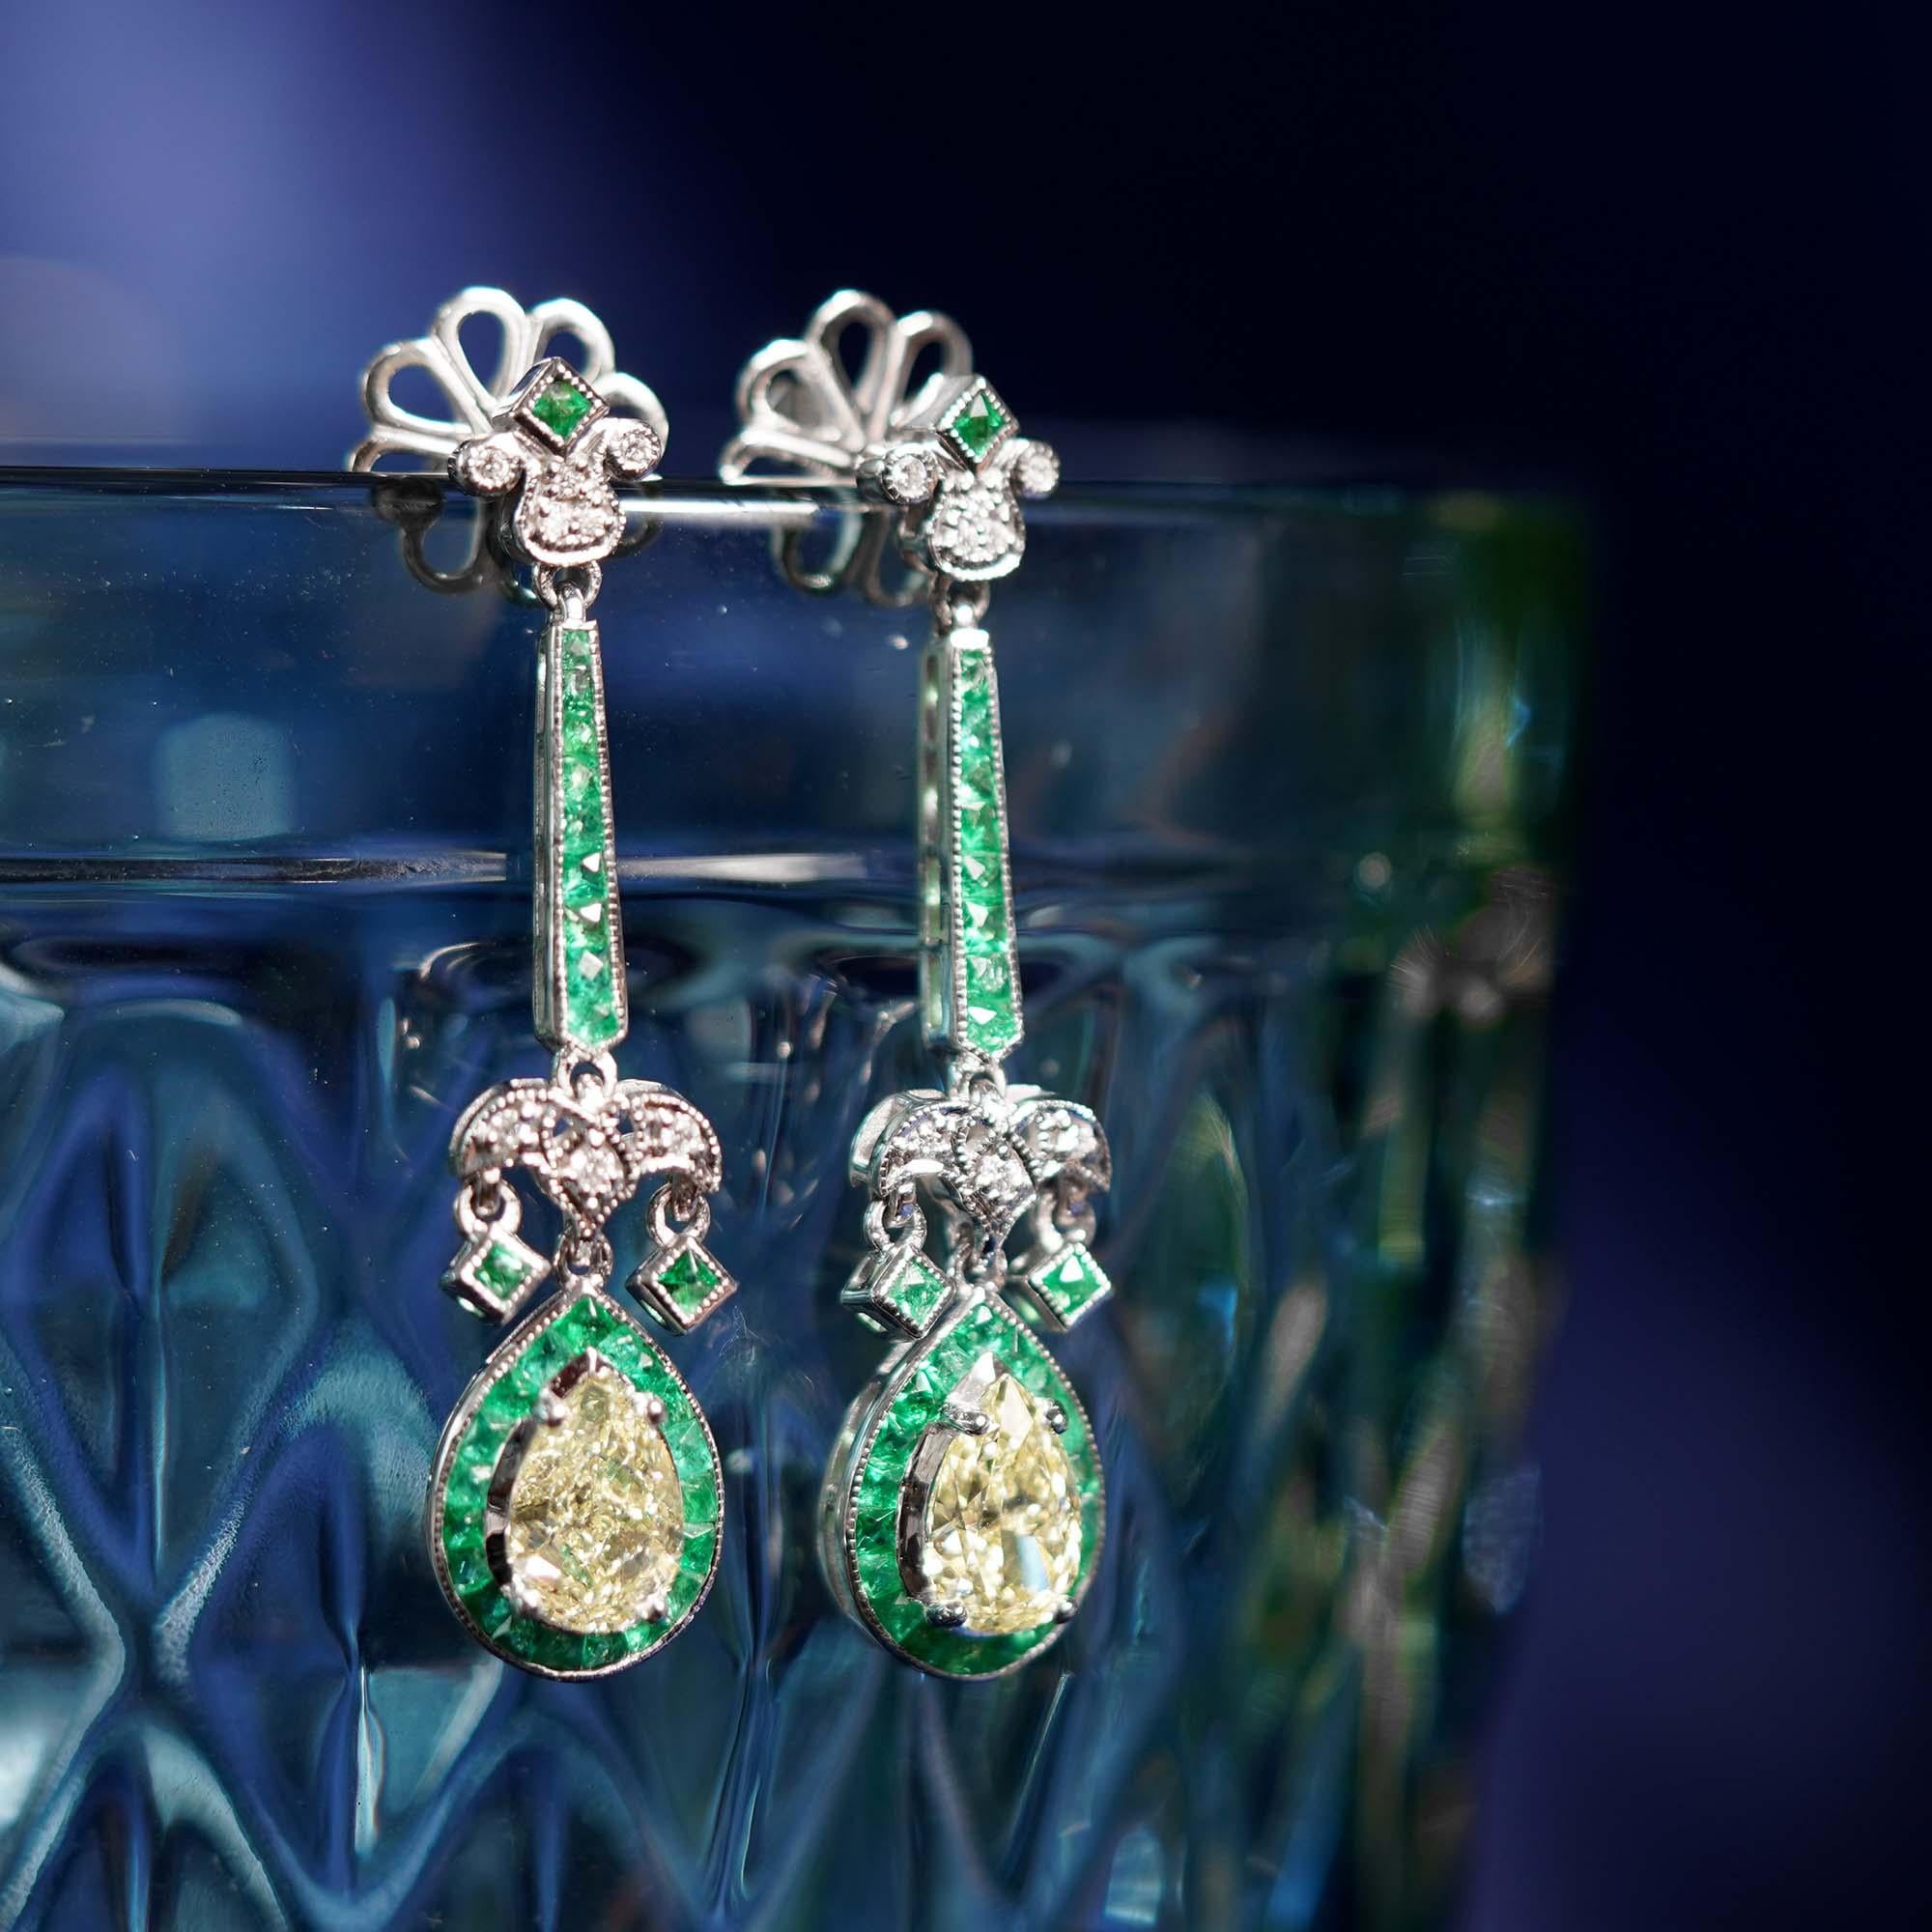 Inspired by the iconic Art Deco era, these fabulous earrings were designed for a true wow factor. Featuring total 2.25 carats weight of pear shape yellow diamonds surrounded by French cut emeralds. Create your stunning look with these lovely